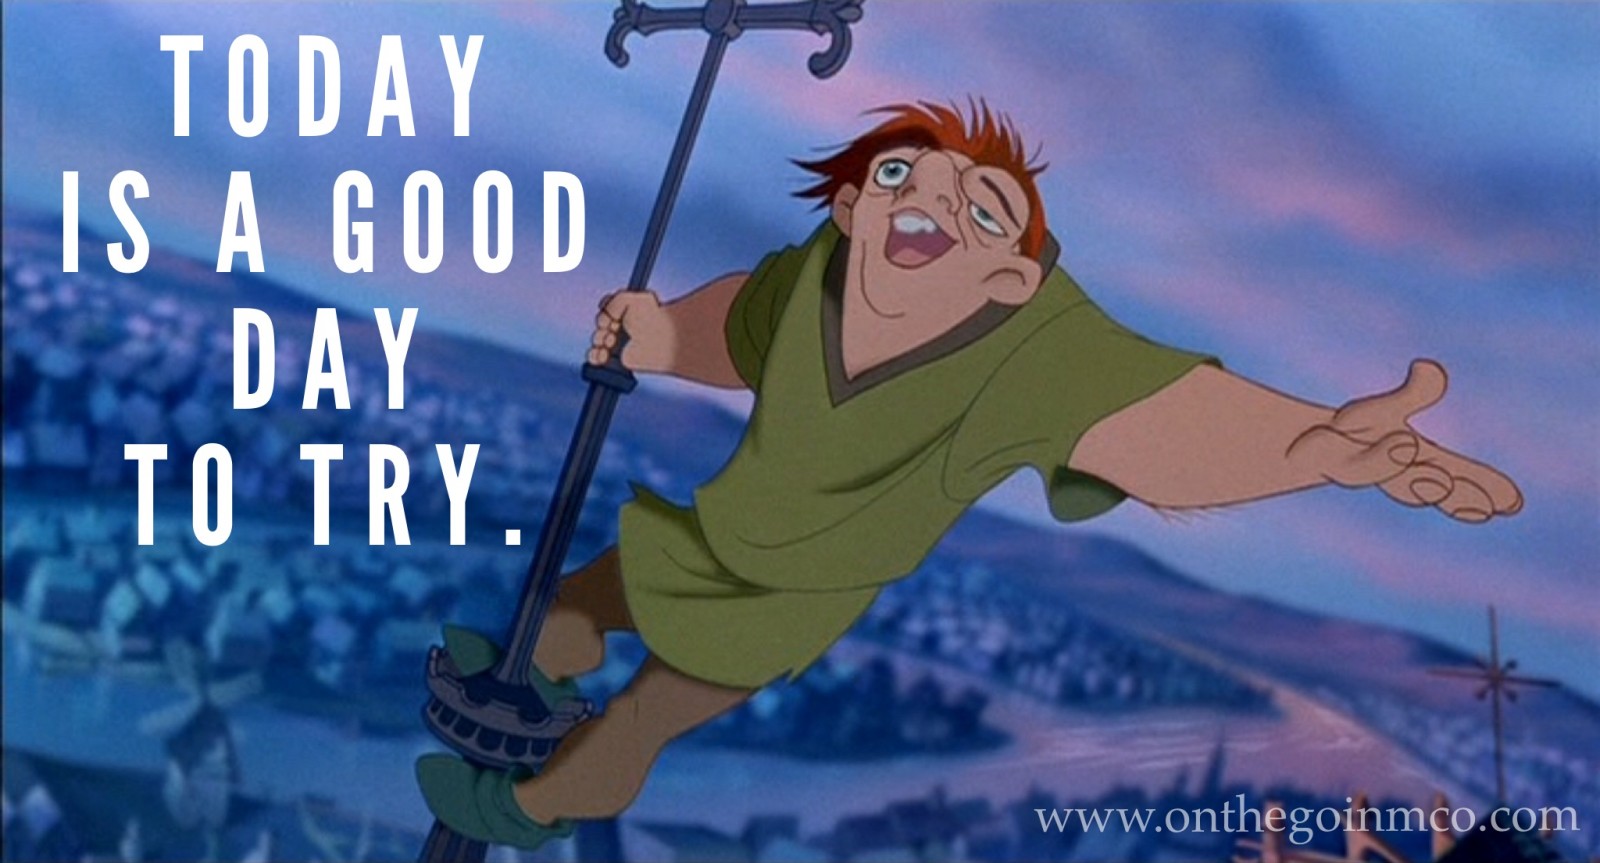 Disney Quotes Motivating Monday The Hunchback of Notre Dame Monday Motivation